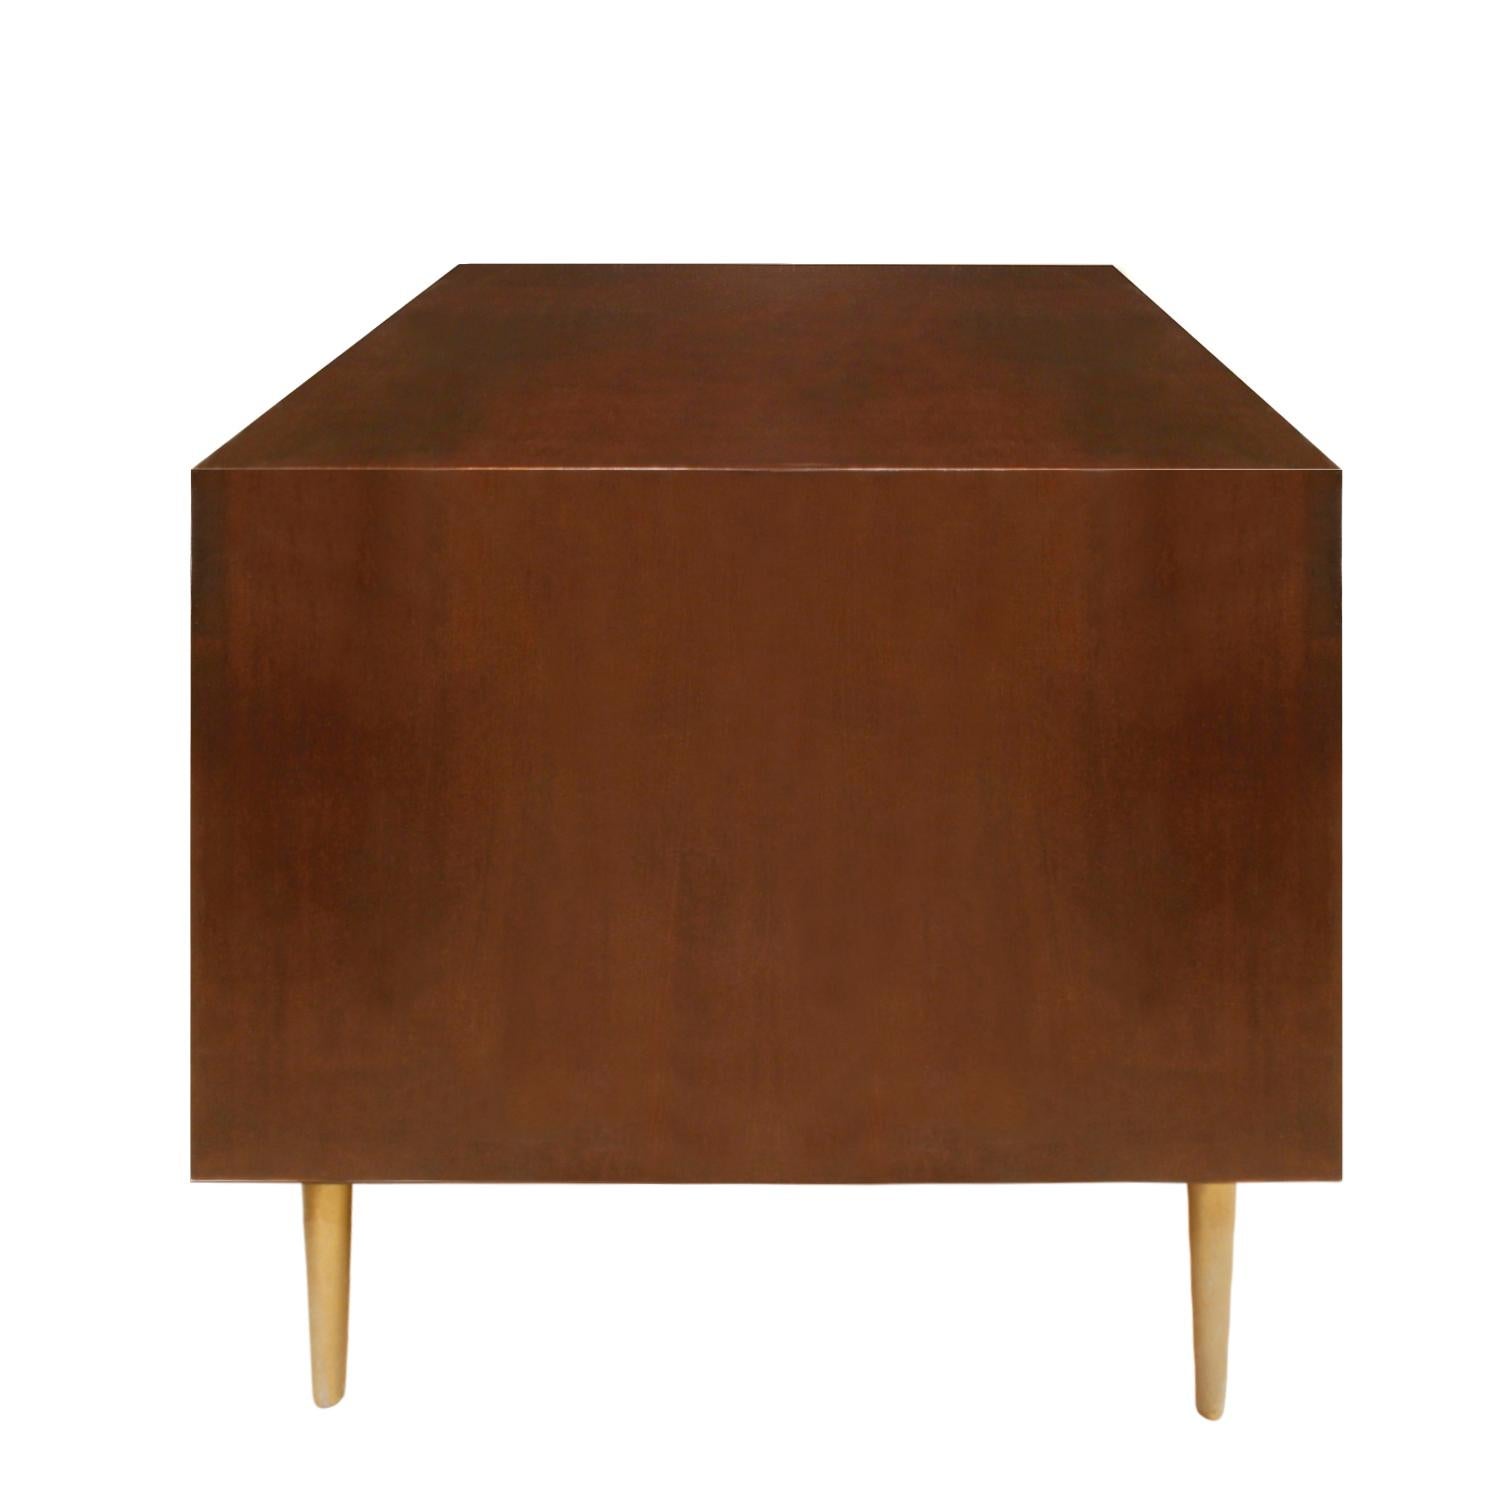 Mid-Century Modern Edward Wormley Side Table in Mahogany with Conical Brass Legs 1940s 'Signed' For Sale